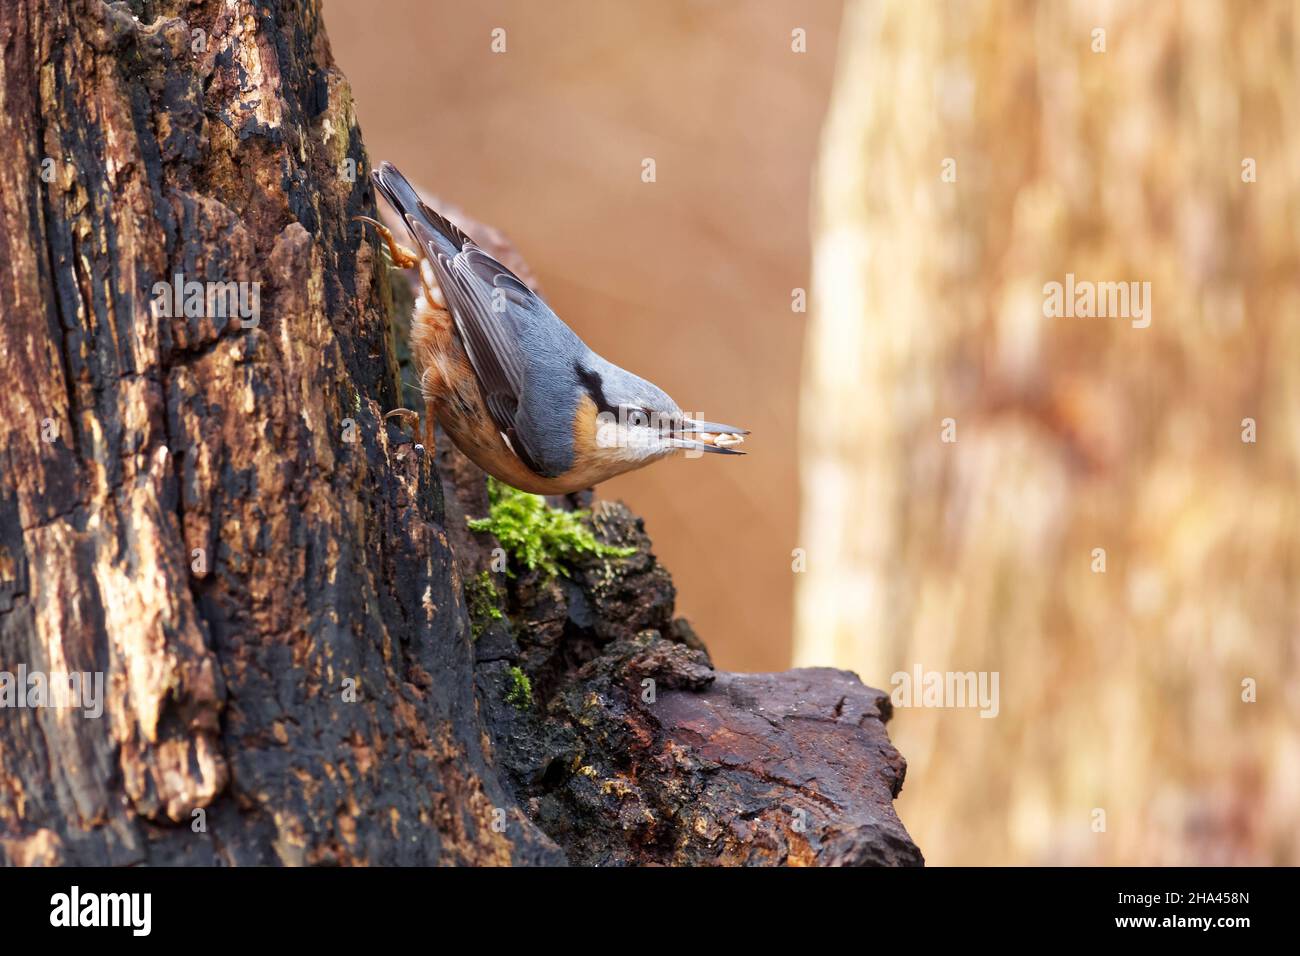 Nuthatch perched on the side of a tree stump with some corn in its beak. Stock Photo